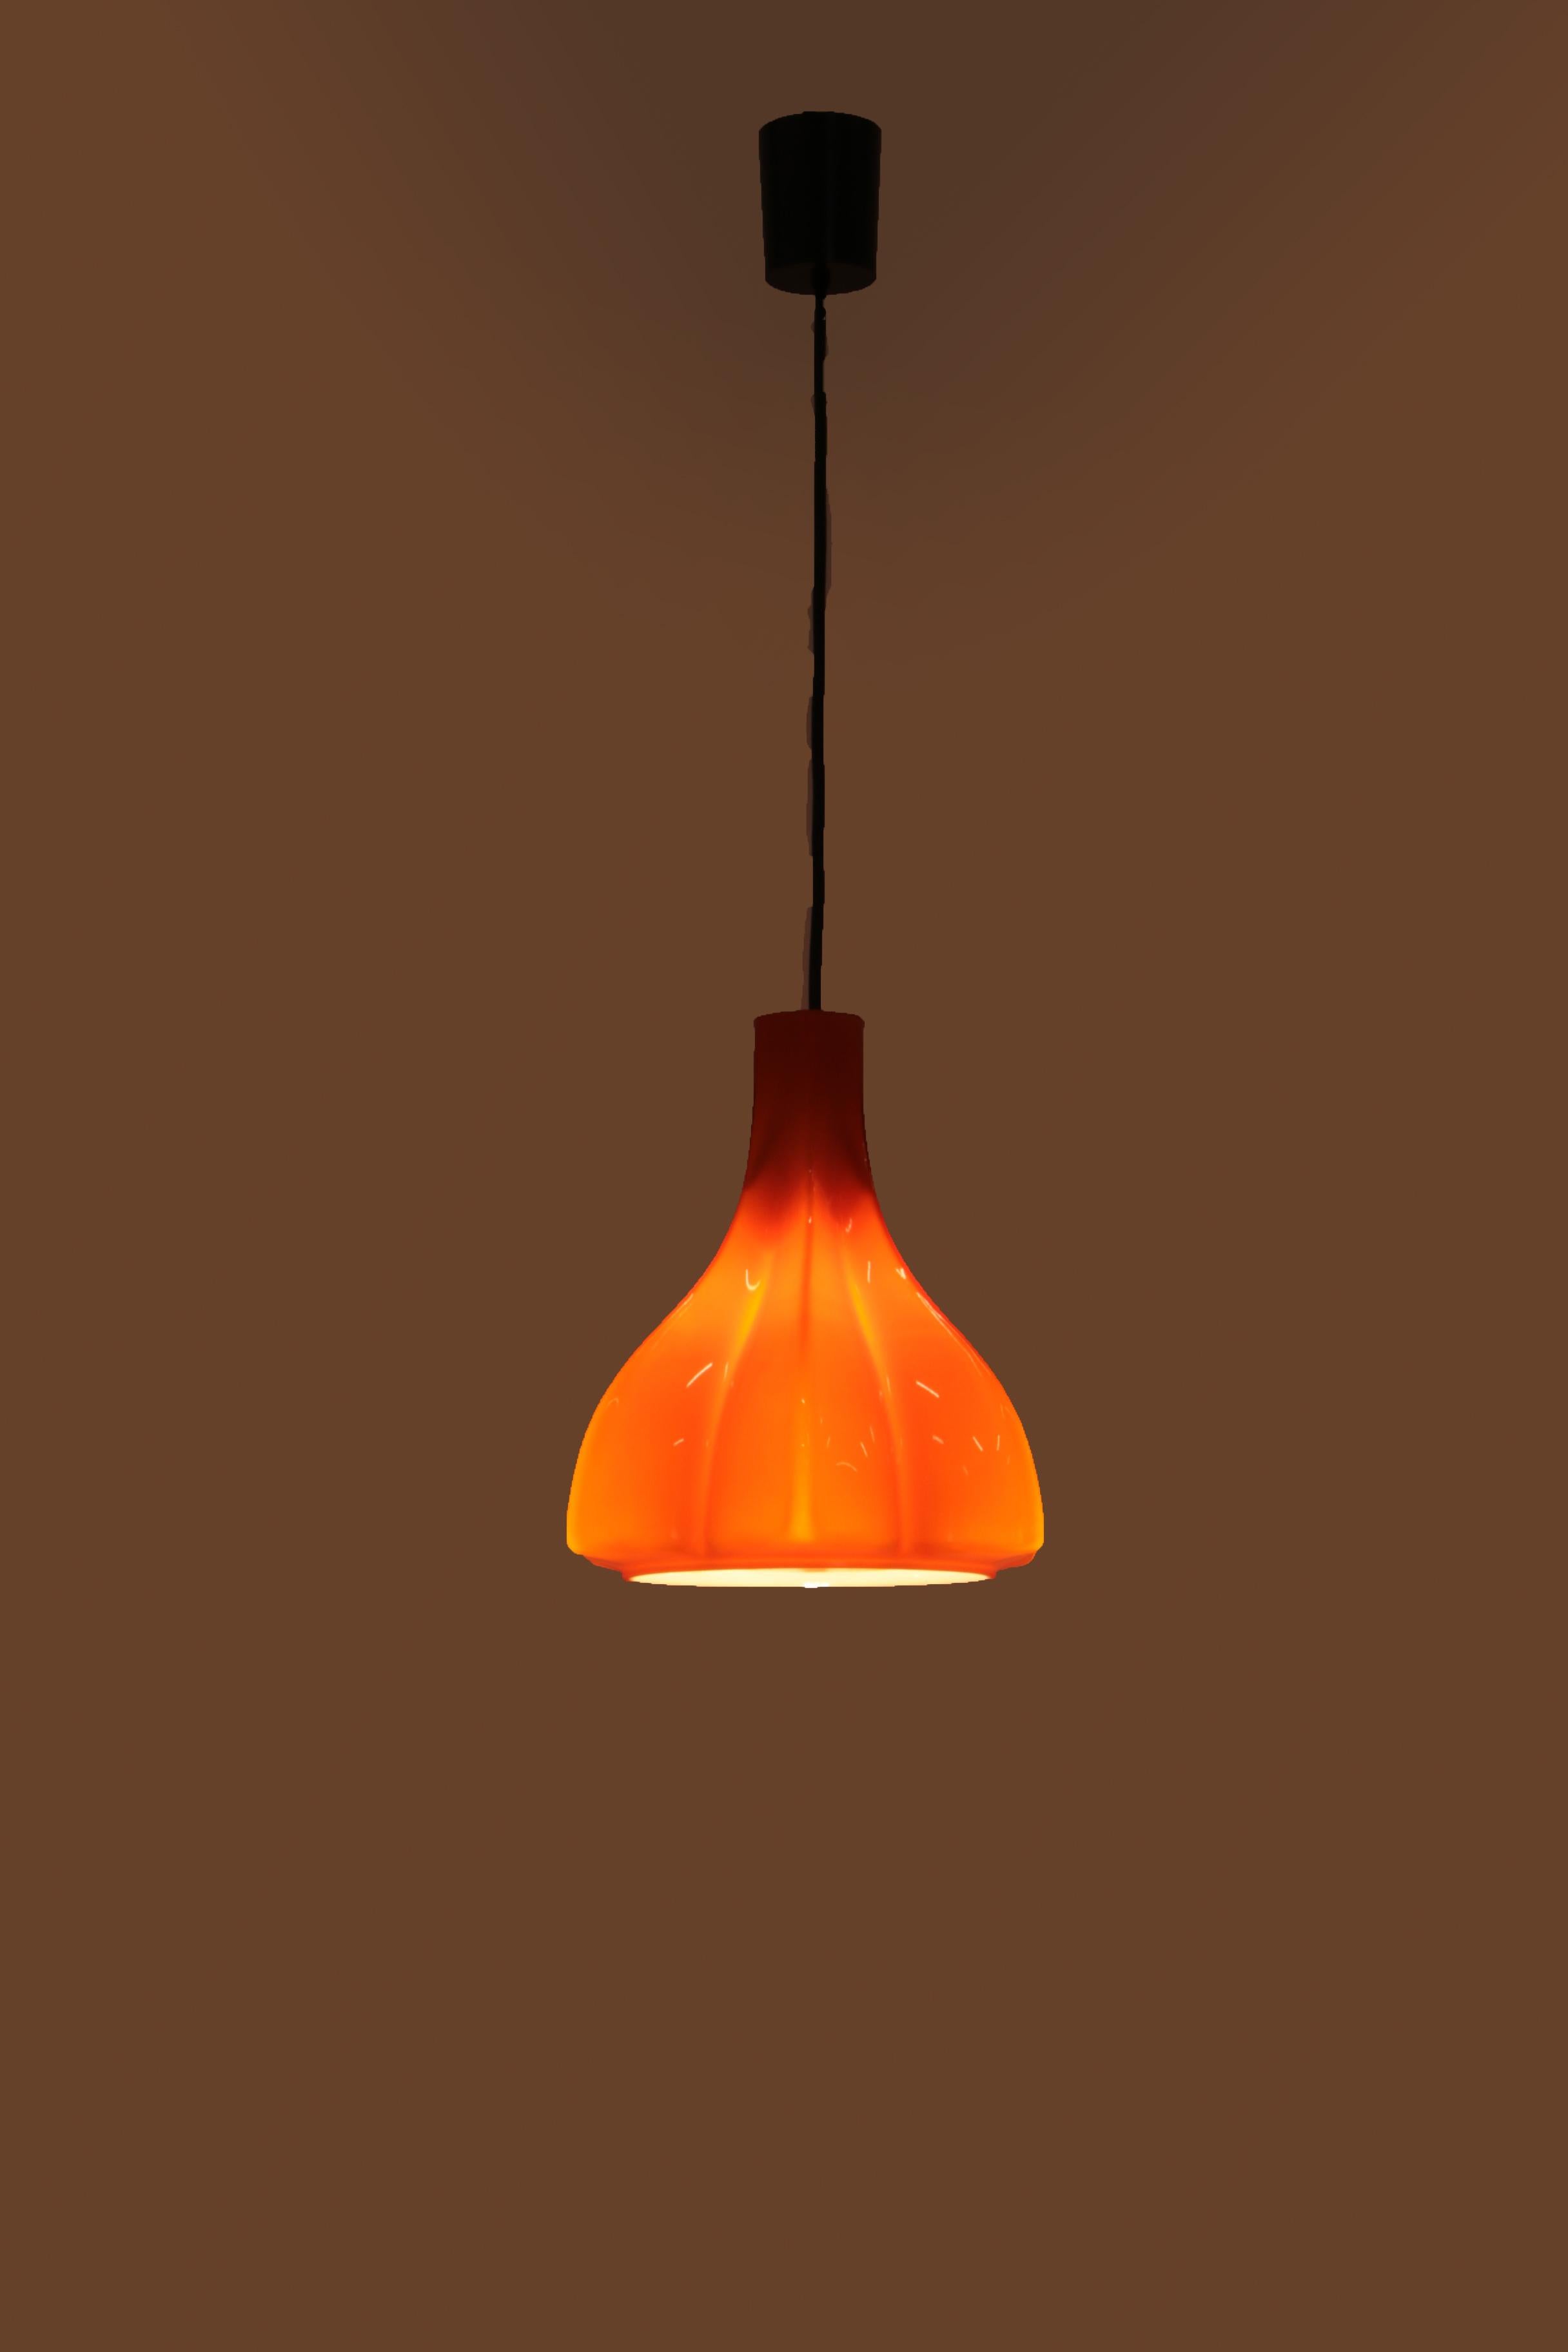 German Vintage Orange Glass Pendant Lamp by Peill and Putzler, 1960 For Sale